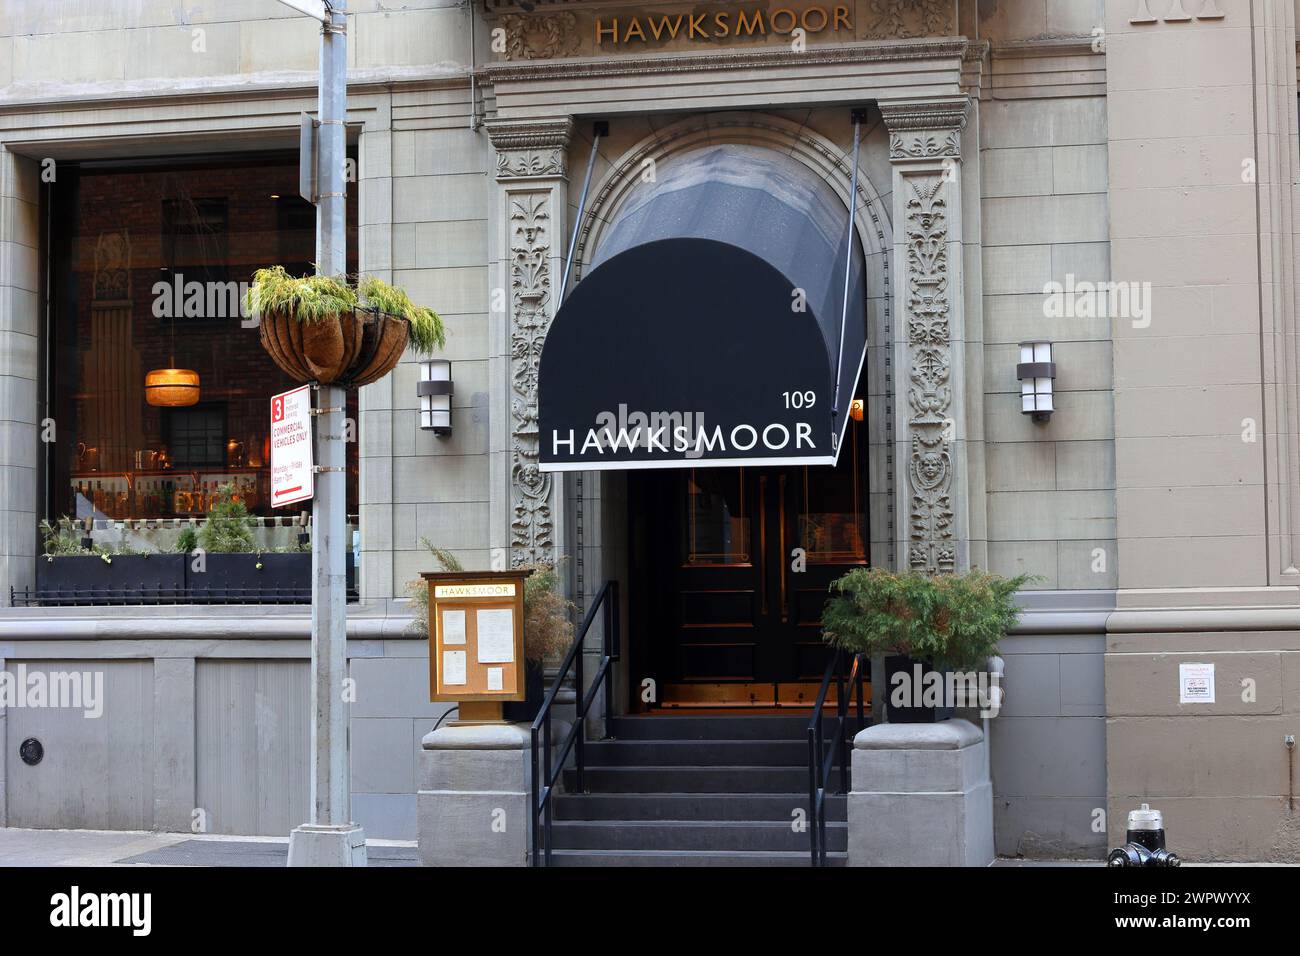 Hawksmoor, 109 E 22nd St, New York, NYC storefront of a British steakhouse and cocktail bar in Manhattan's Gramercy neighborhood. Stock Photo